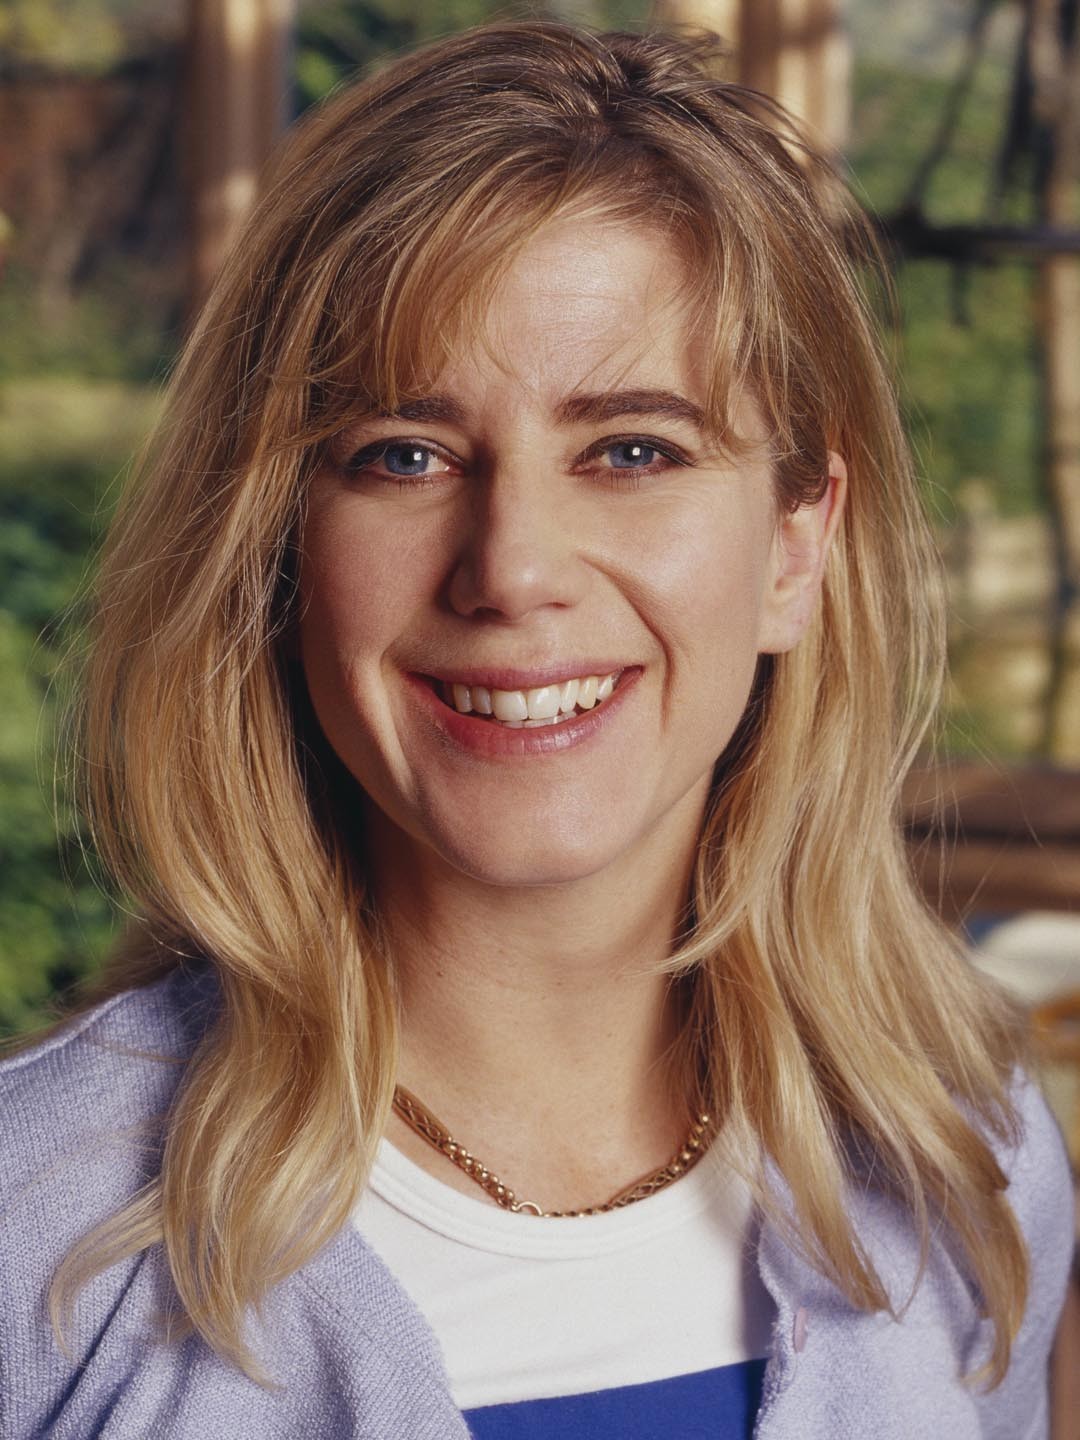 Imogen stubbs movies and tv shows